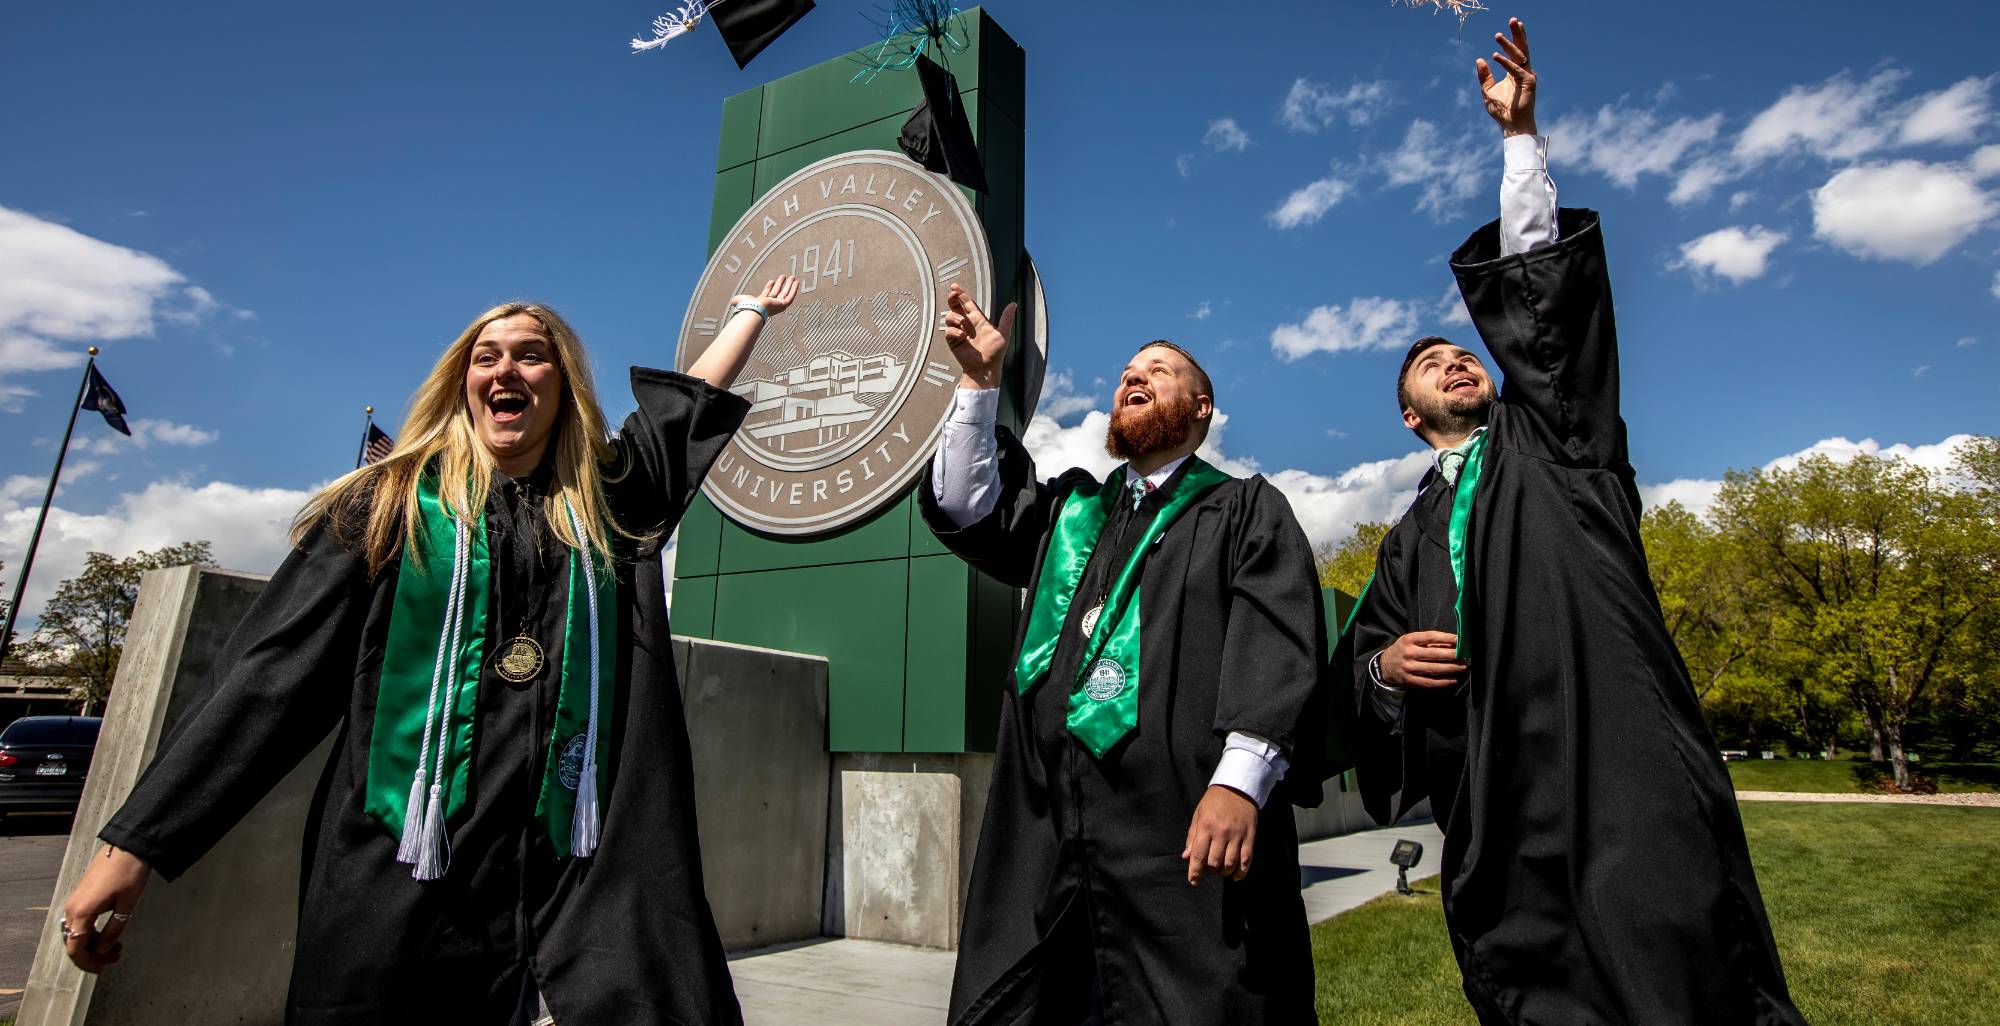 3 students throwing caps up at graduation in front of UVU sign